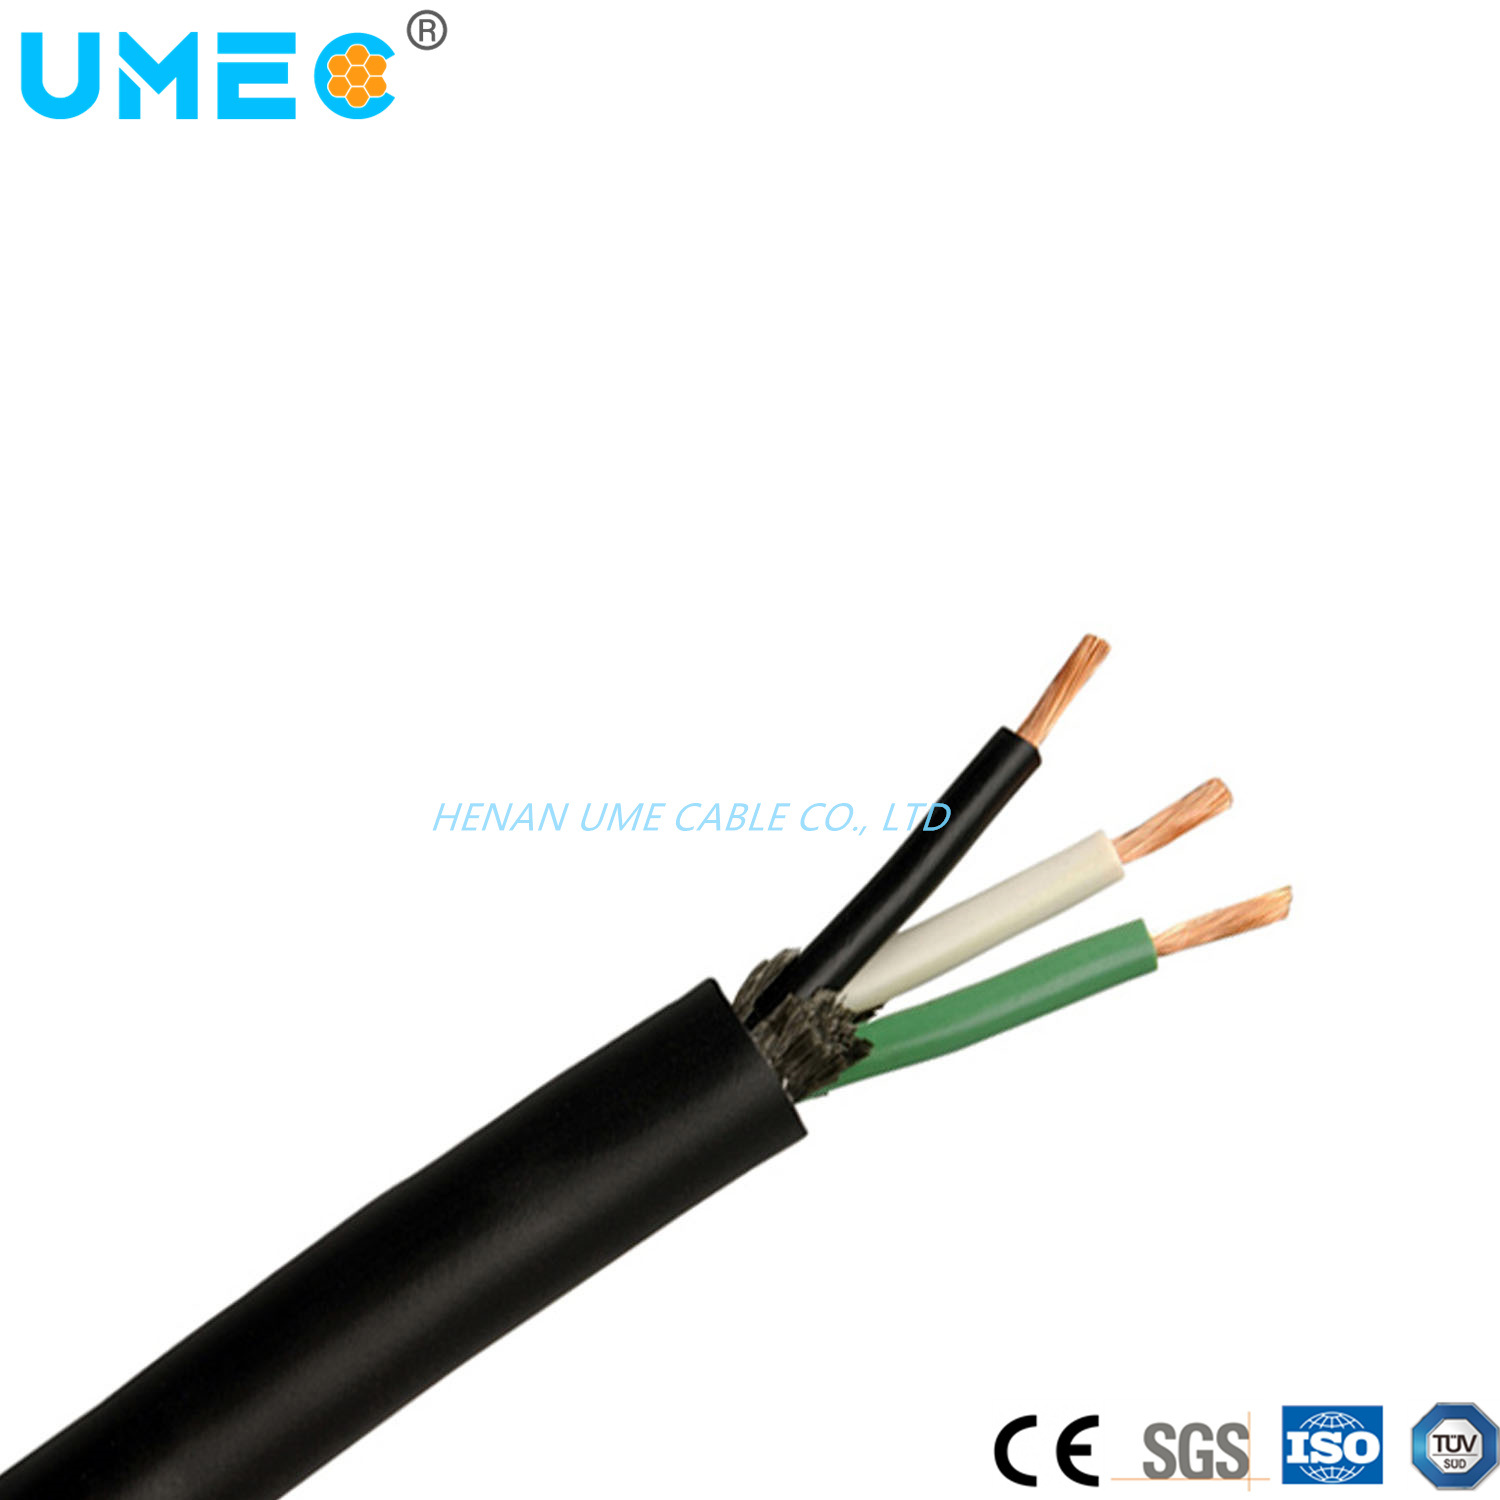 IEC So/Sow/Soow/Sjoow Electrical Cable 16AWG14AWG 10AWG 8AWG 300V 600V Rubber Soow Cable